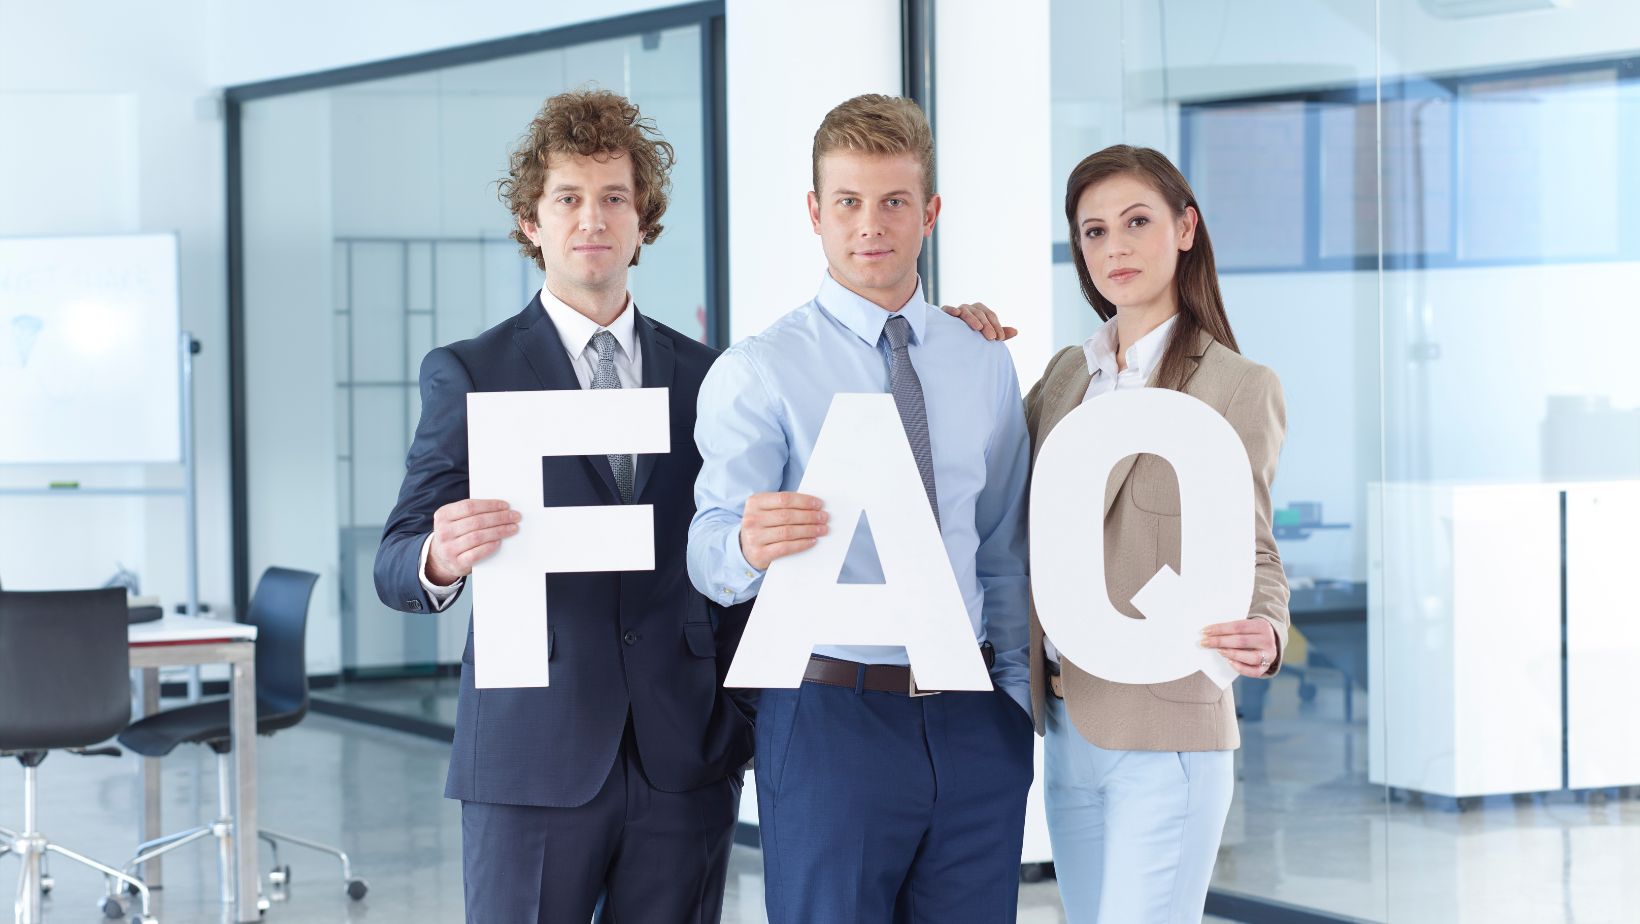 Insurance Requirements For Sellers: FAQ's